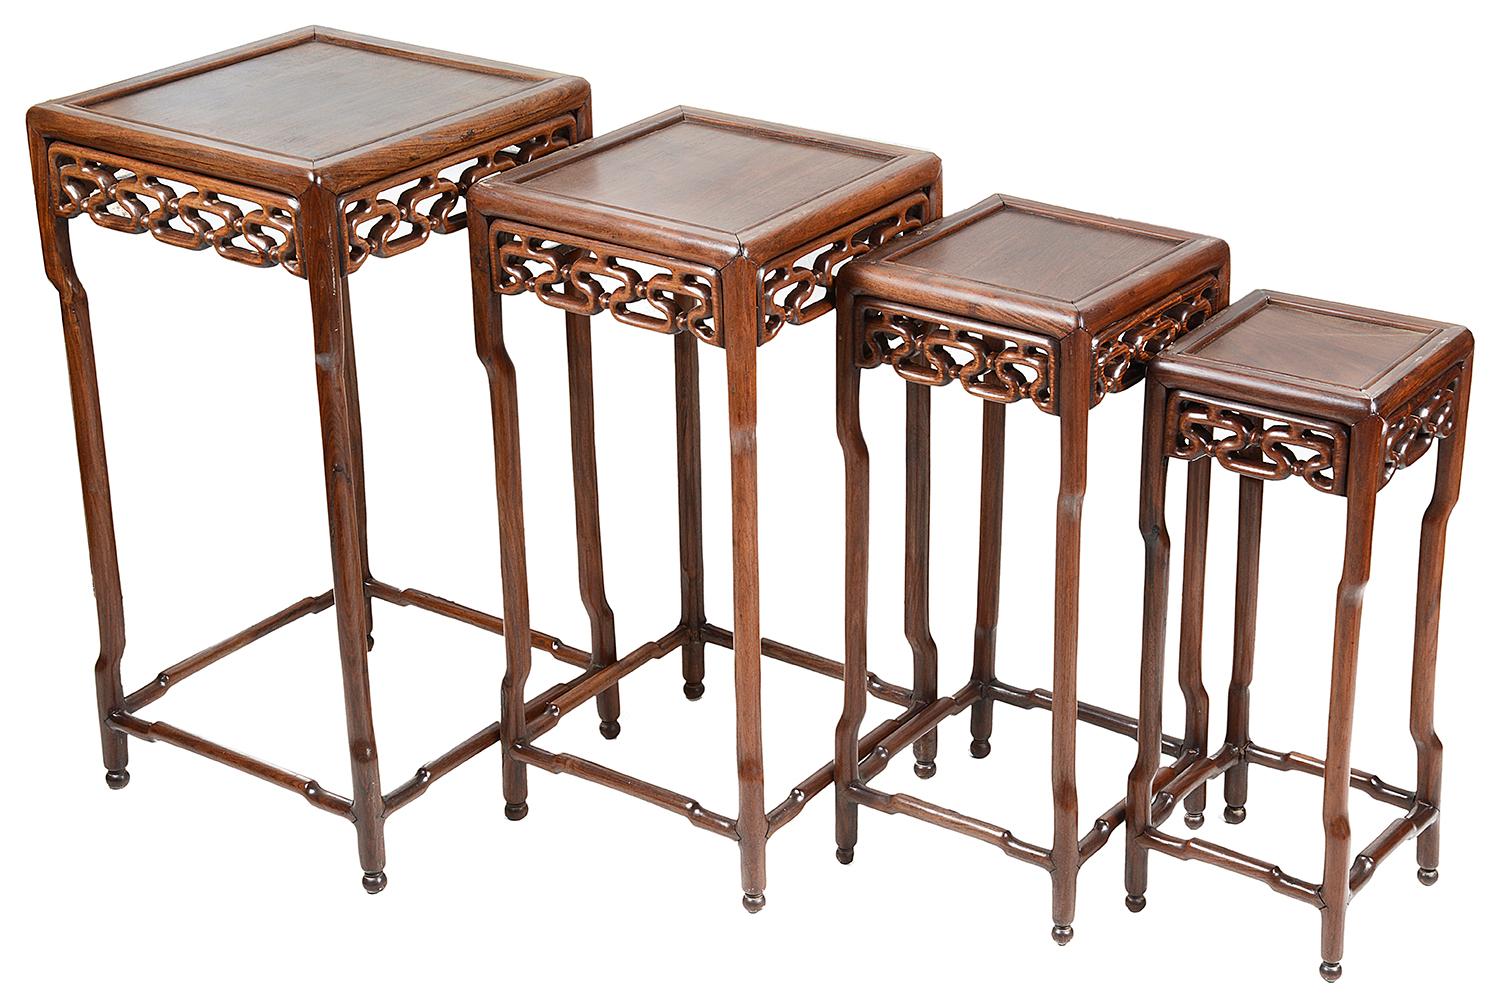 A good quality nest of four late 19th century Chinese hardwood tables, each with inset tops, carved scrollwork frieze decoration, raised on shaped supports and united with stretchers below.